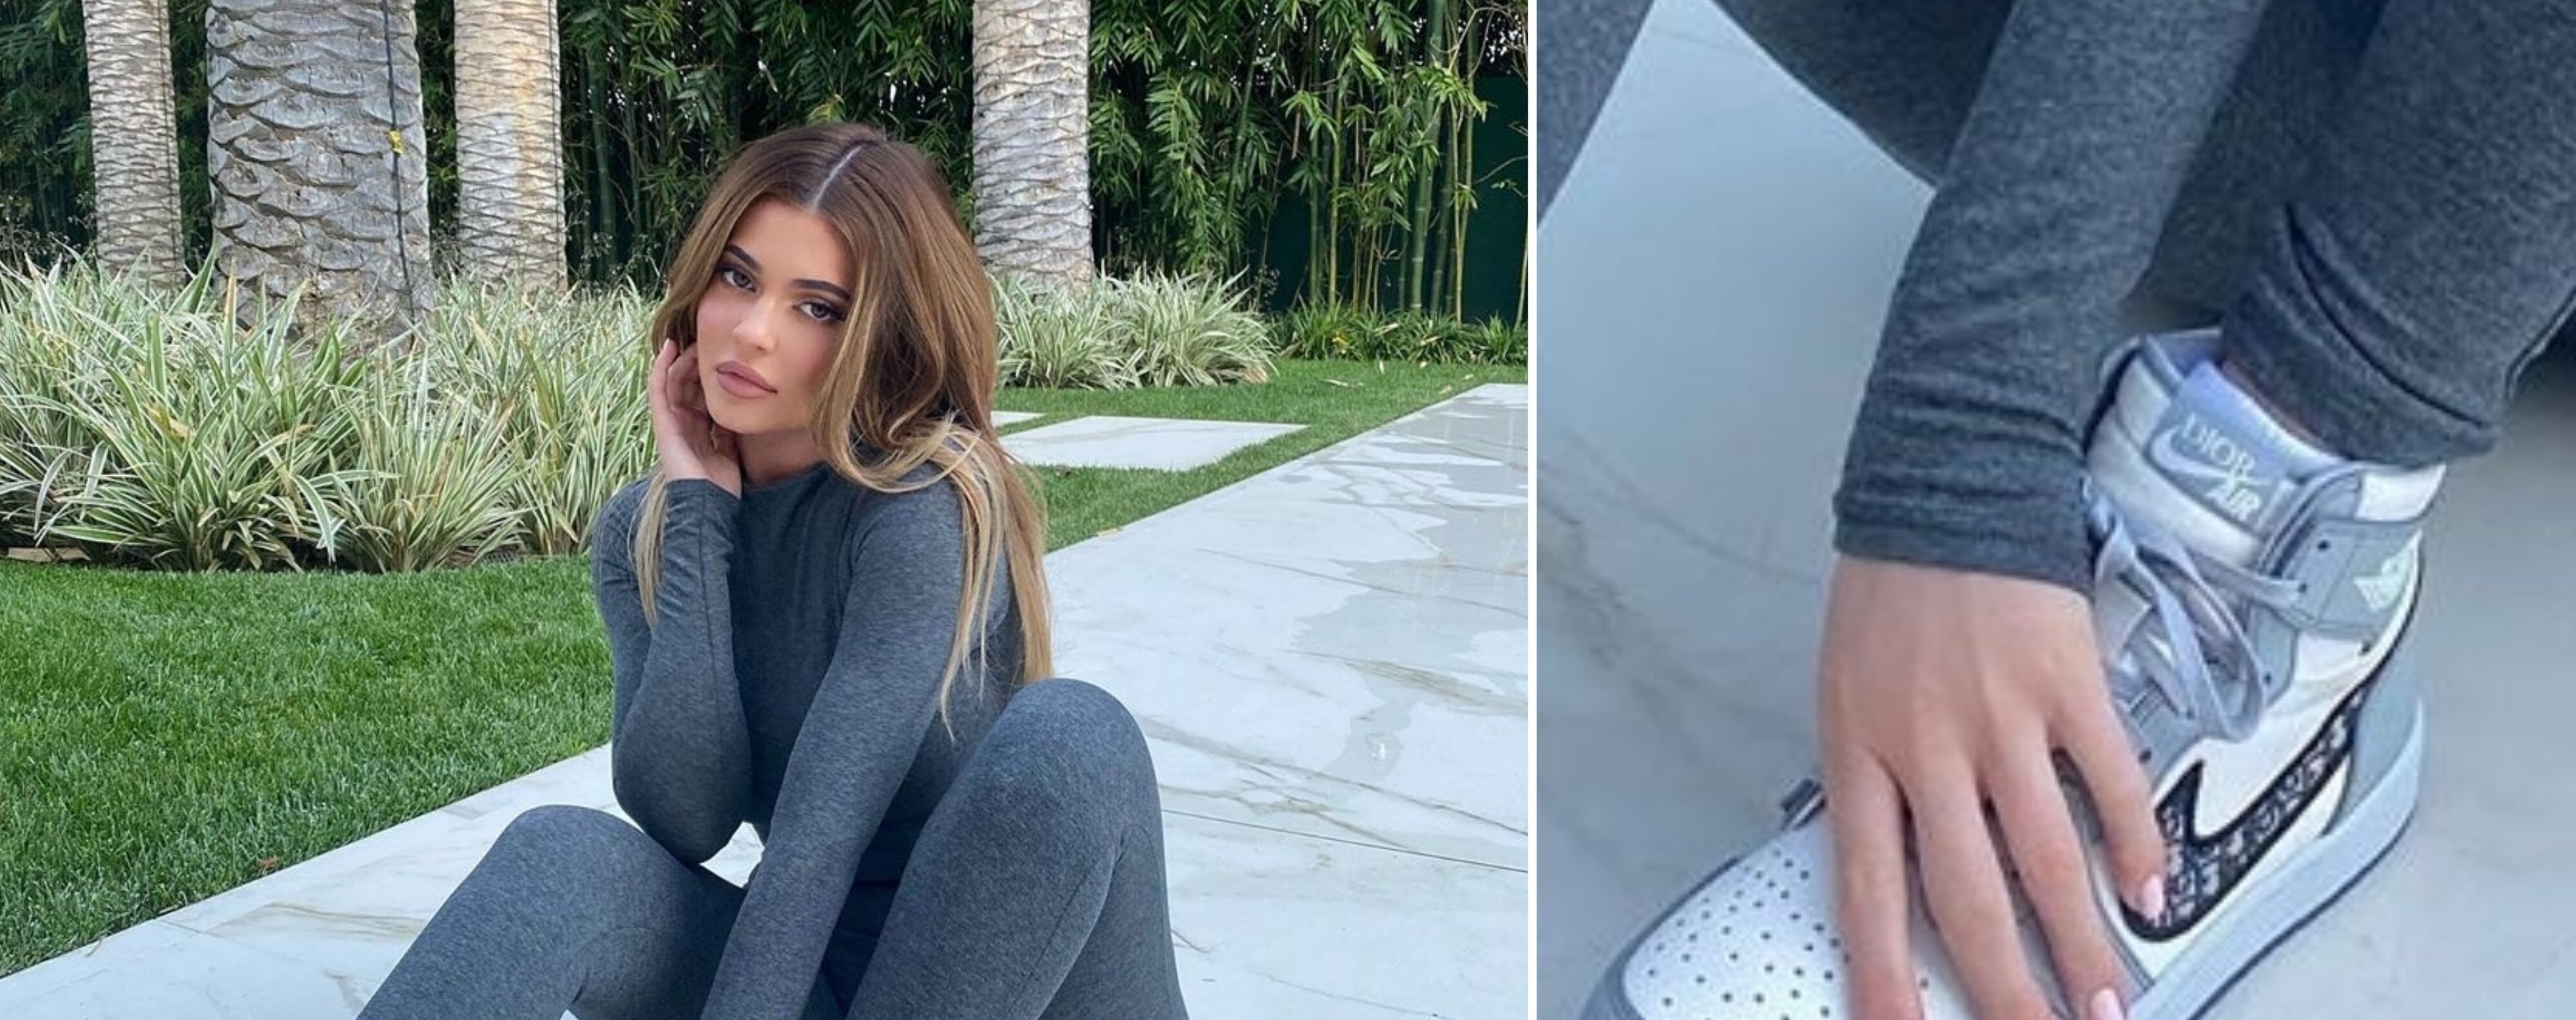 Kylie Jenner's Dior x Nike Air Jordan 1's got us looking closer at  footwear: 5 shoes from Dior, YSL, Dolce & Gabbana, Chloé and Givenchy to  elevate your outfit